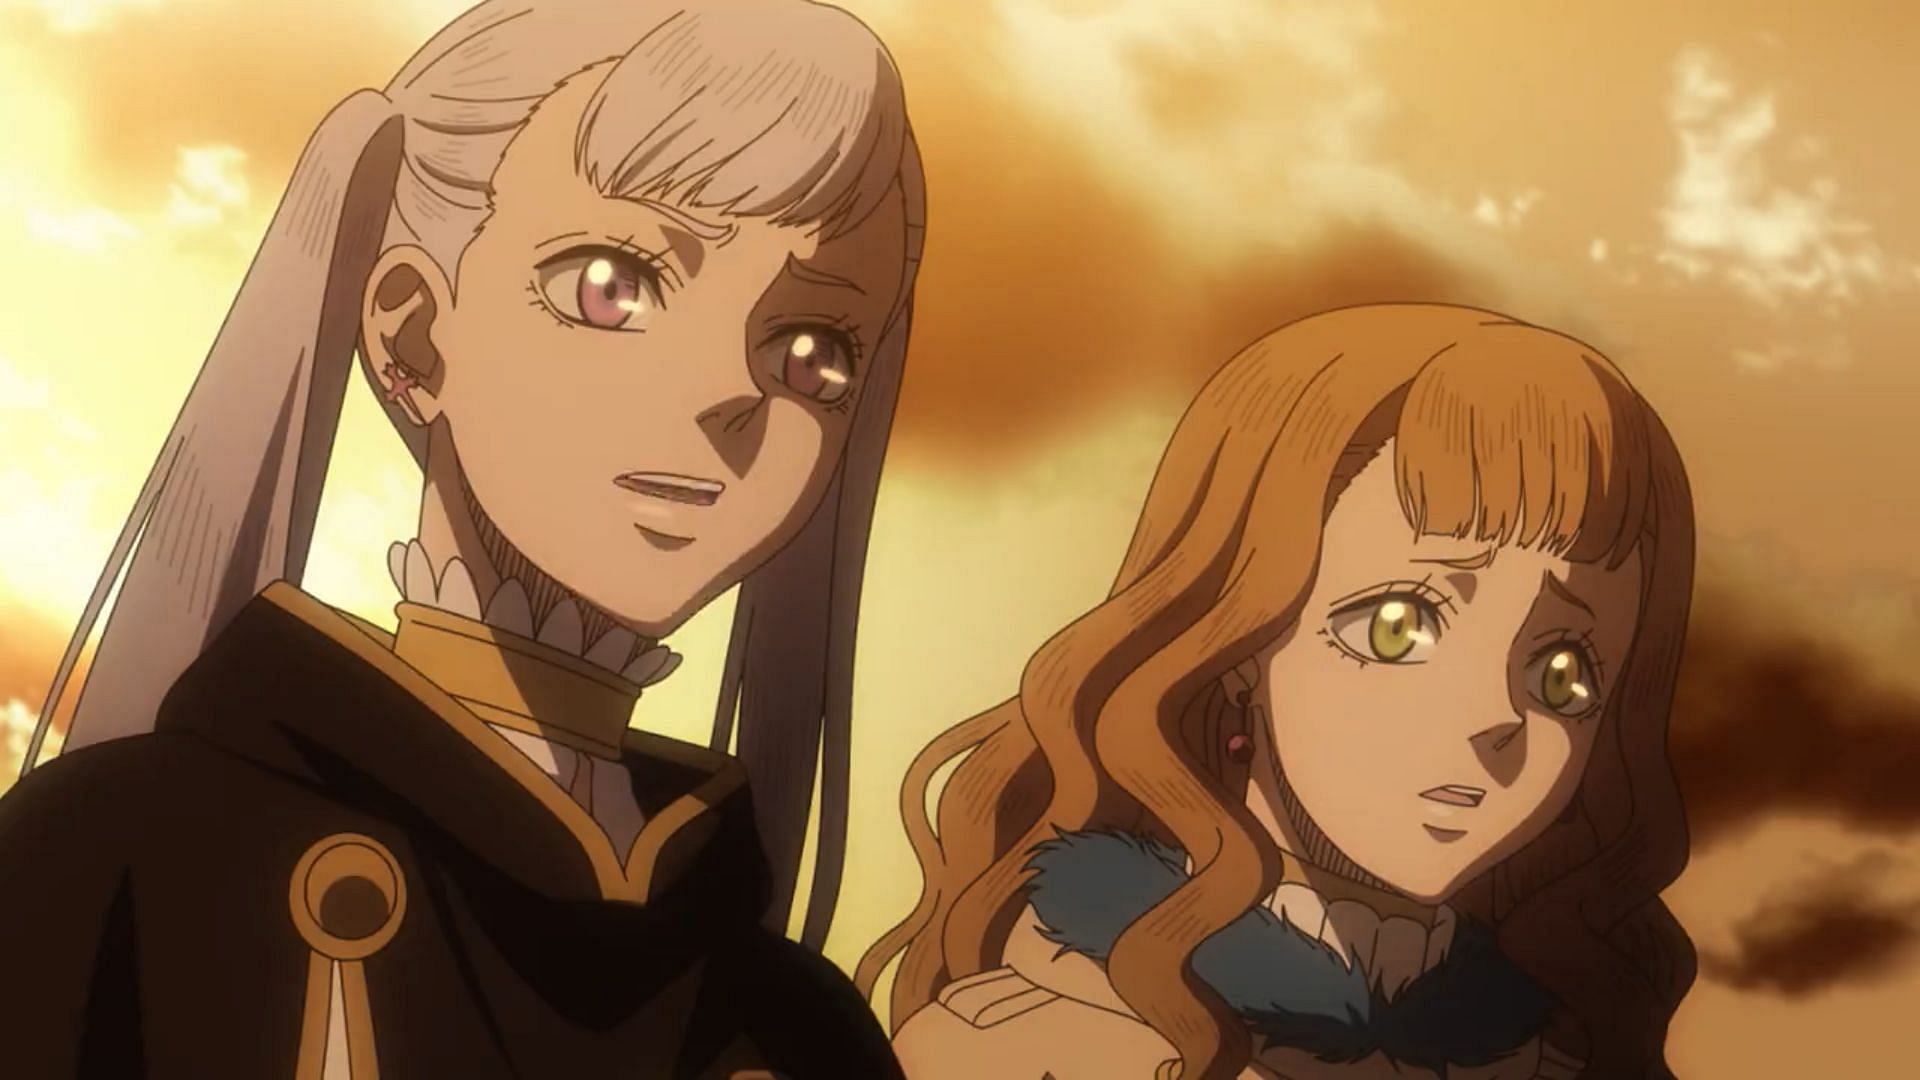 Noelle (left) and Mimosa (right) are some of the series